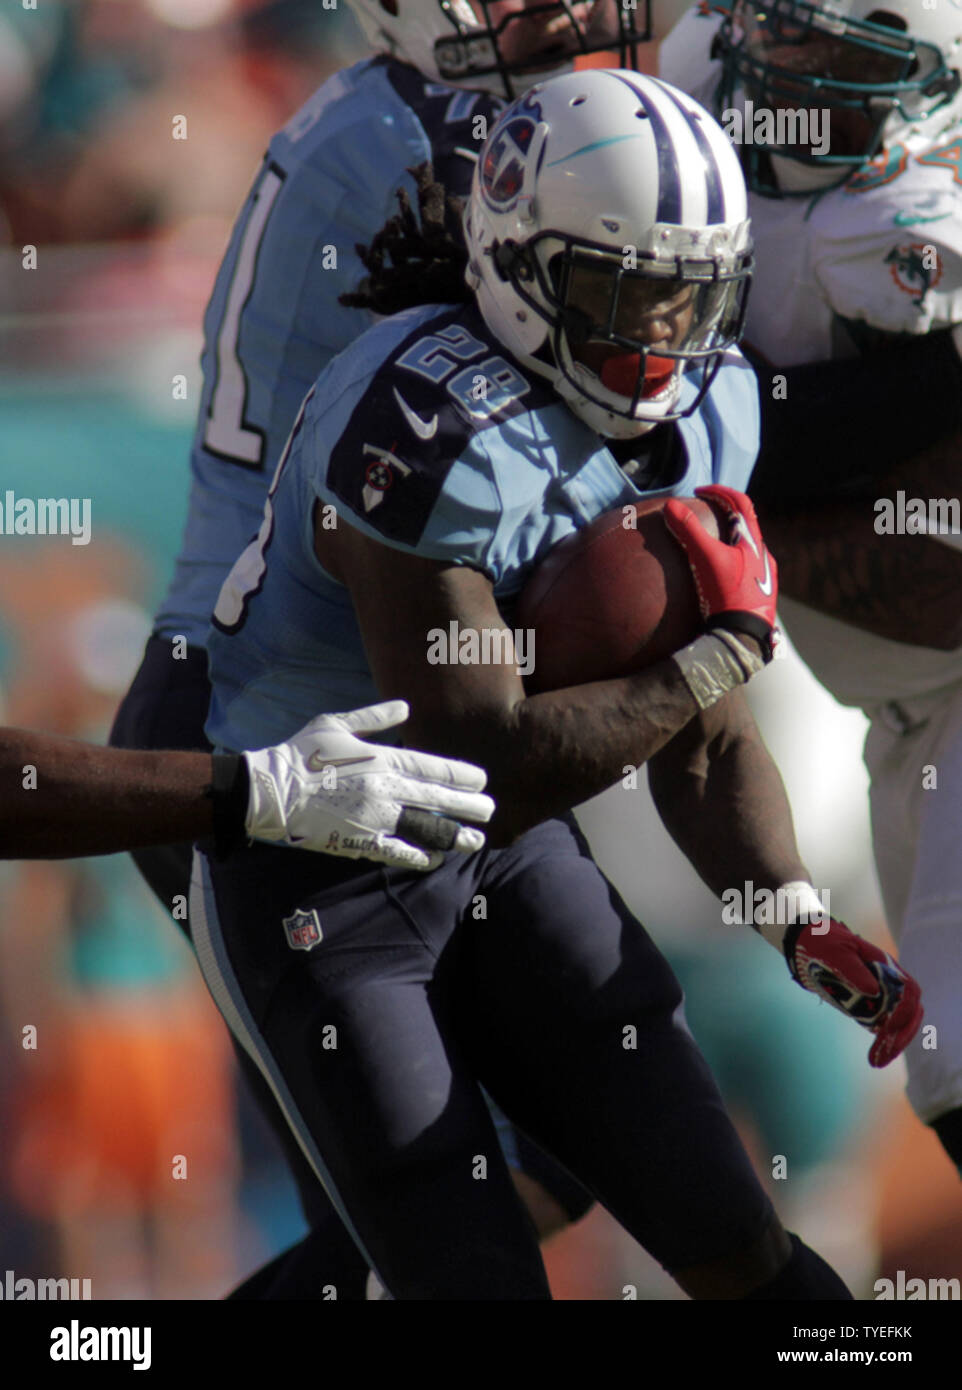 Tennessee Titans cornerback Alterraun Verner (20) runs  against the Miami Dolphins during first half action at Sun Life Stadium November 11, 2012  in Miami, Florida. The Tennessee Titans beat the Miami Dolphins 37-3.        UPI/Susan Knowles Stock Photo